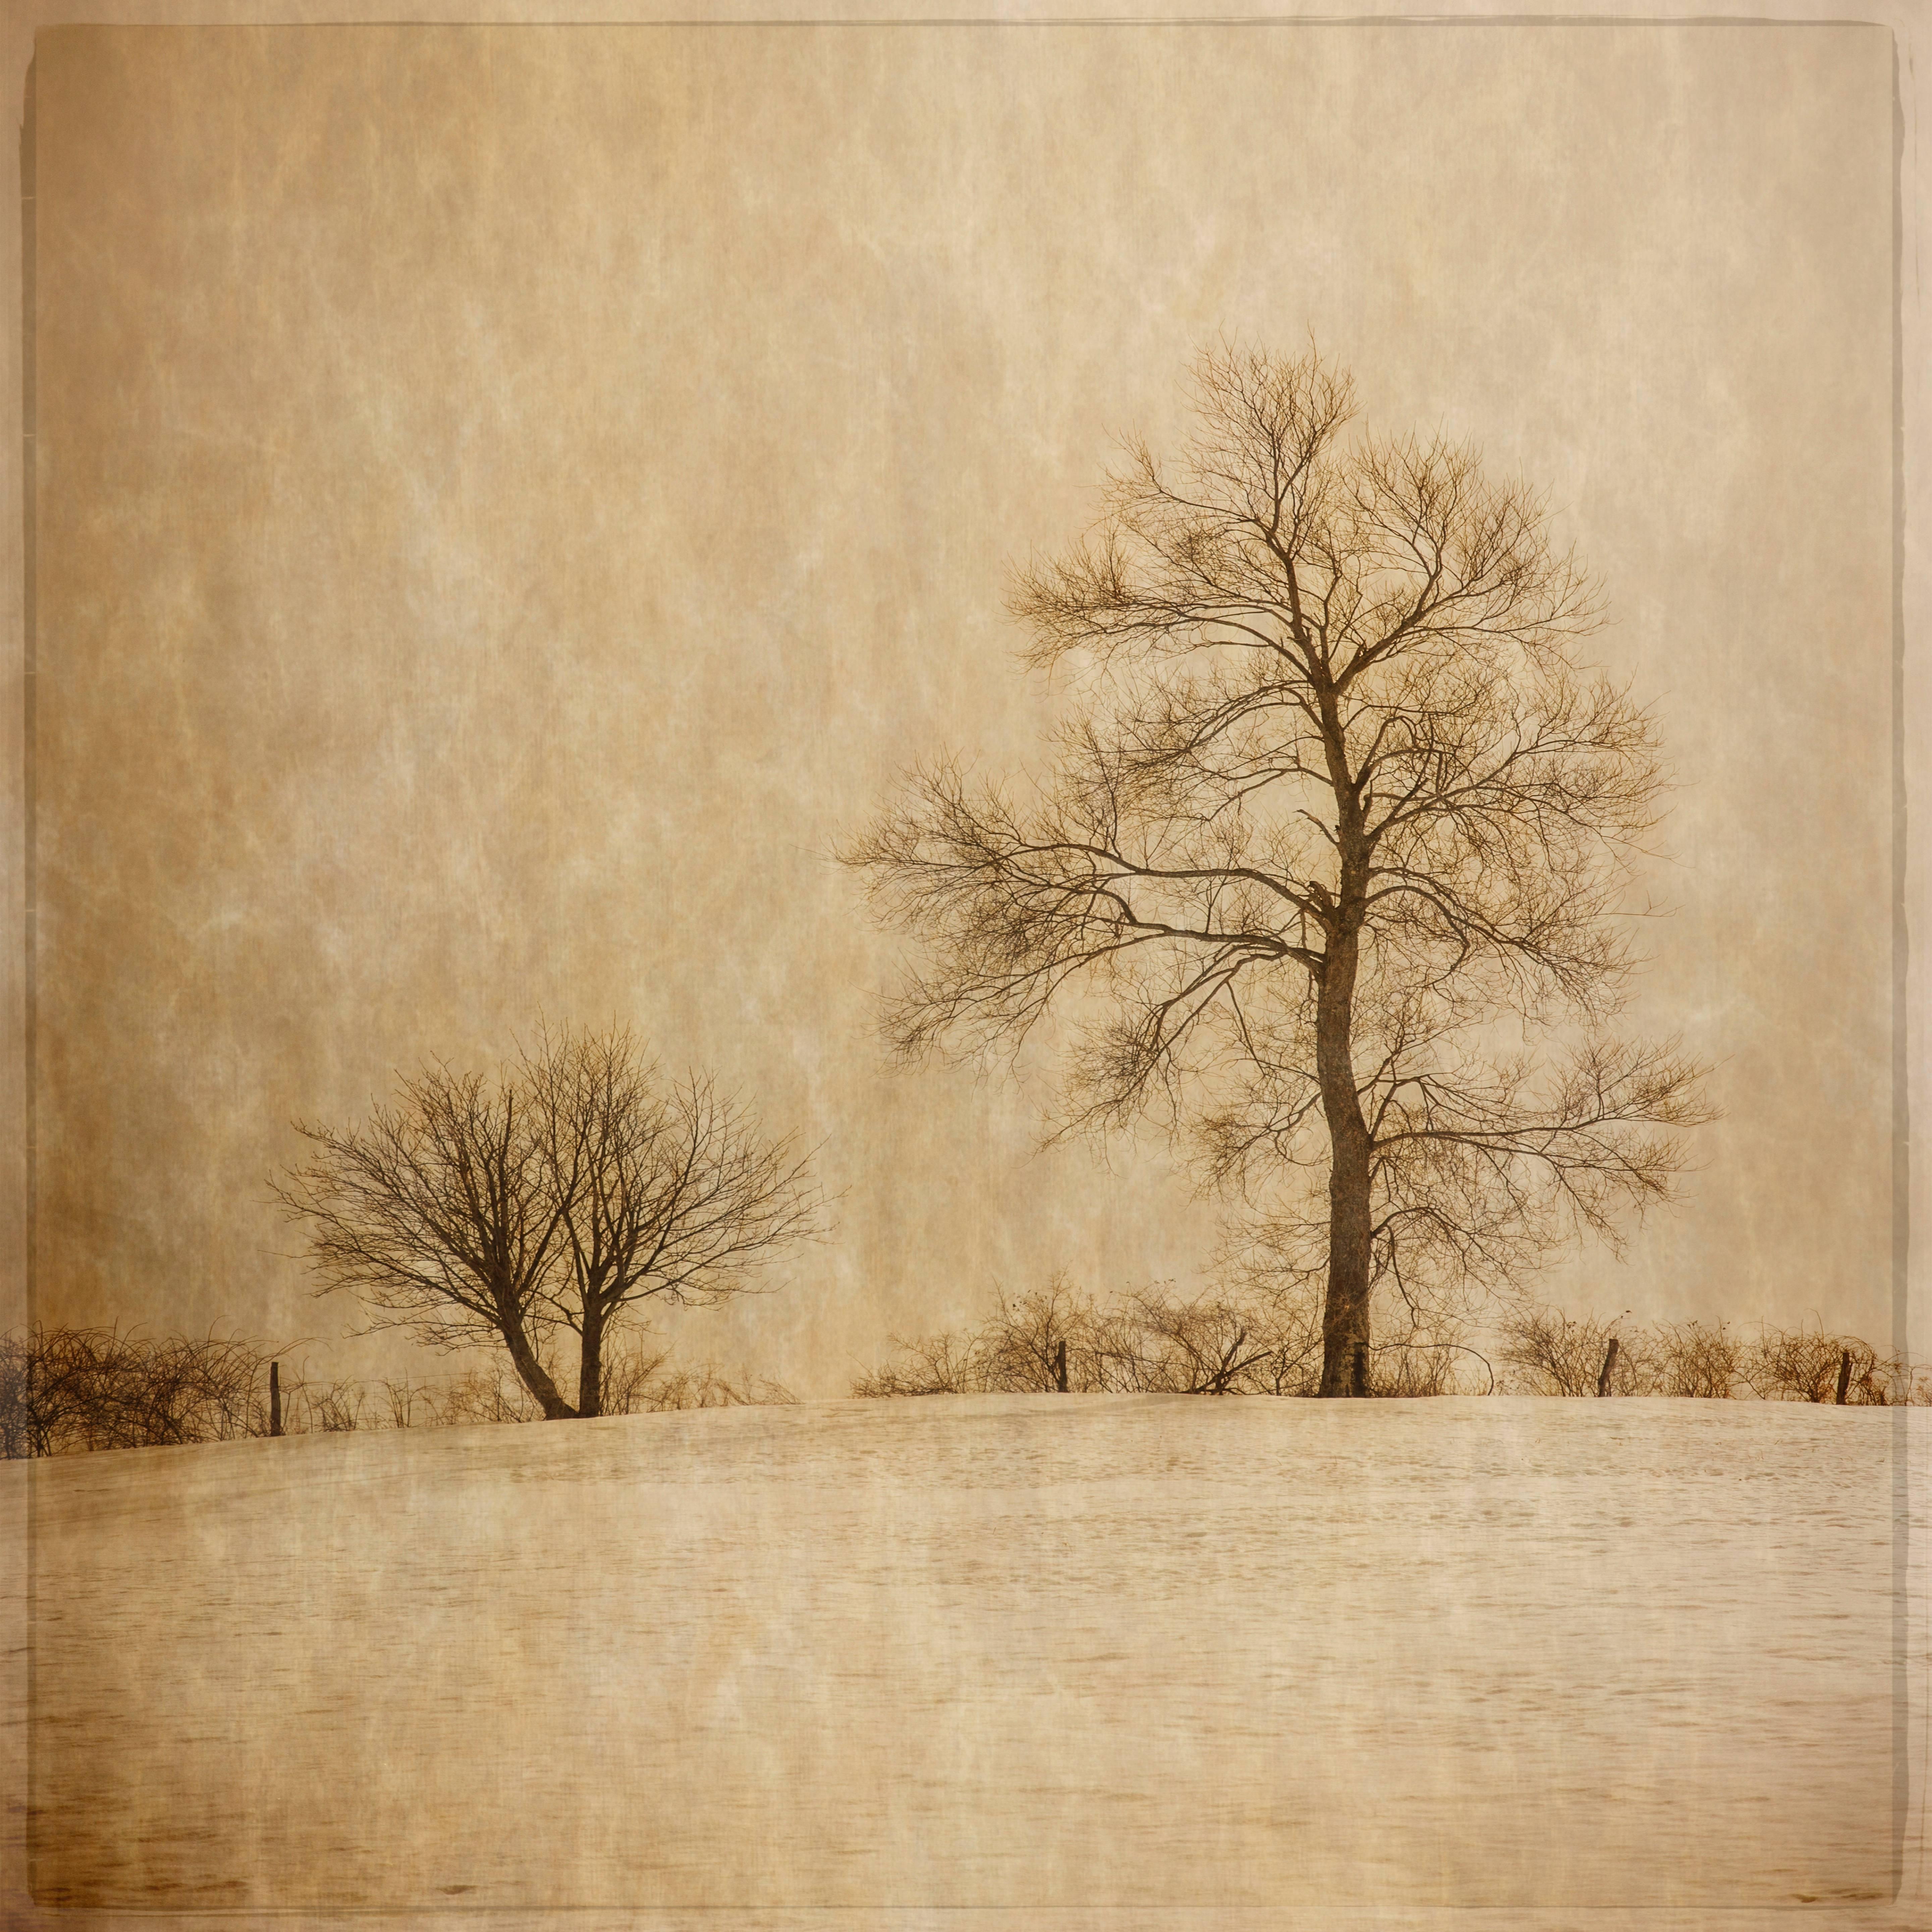 Winter Farm Fields (Vintage Style Sepia Toned Landscape Photograph of Trees)